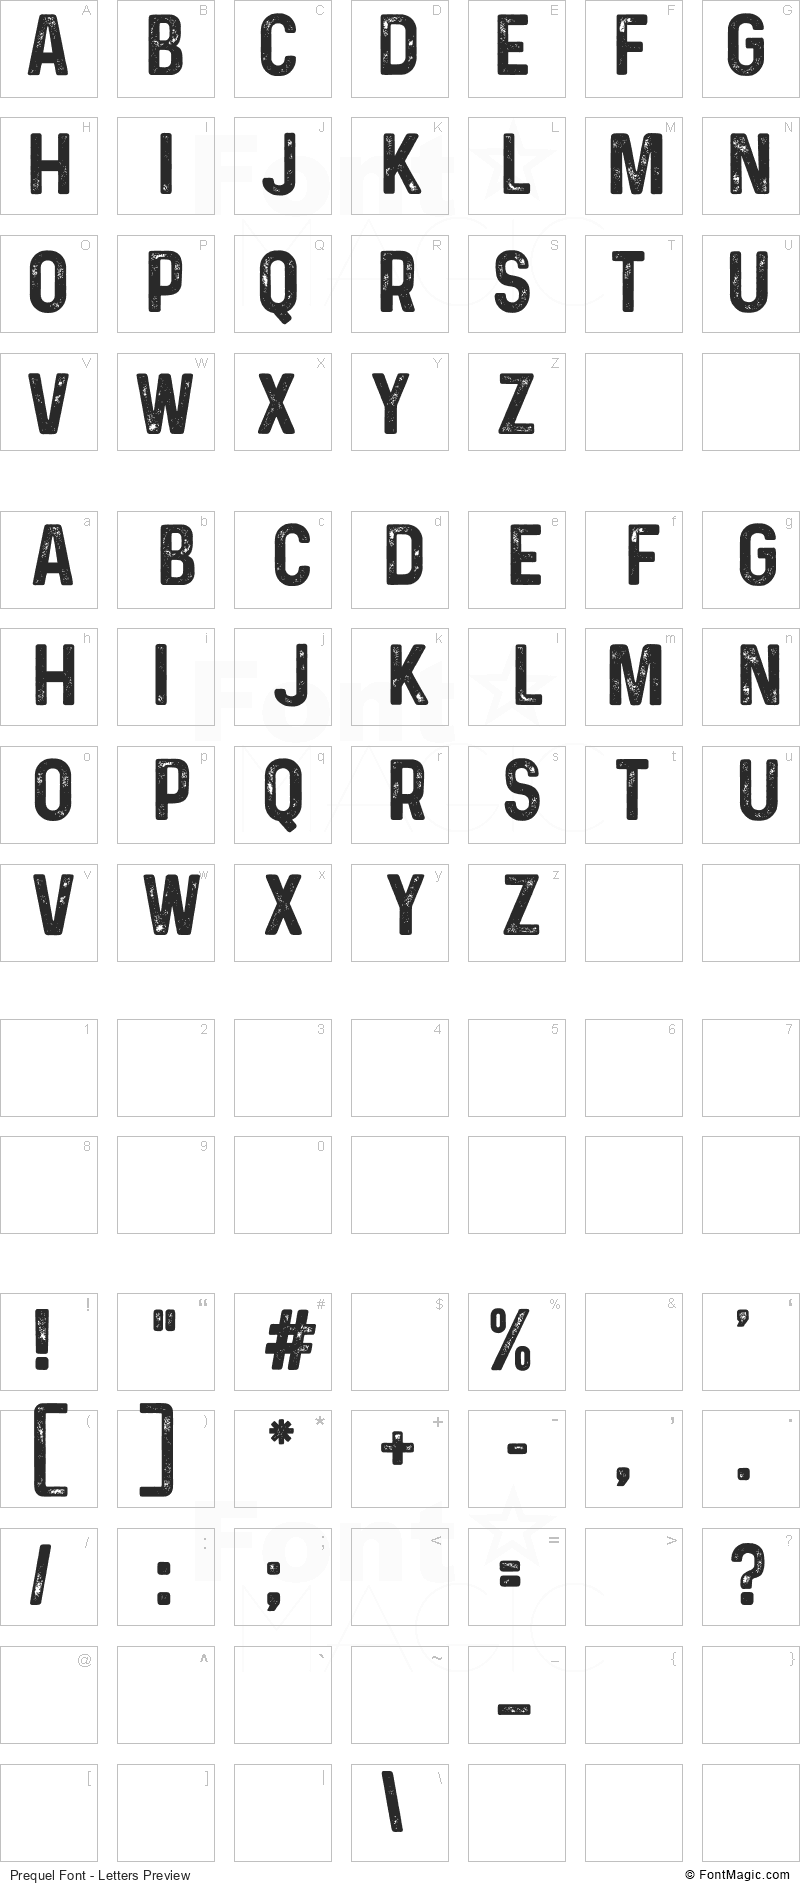 Prequel Font - All Latters Preview Chart